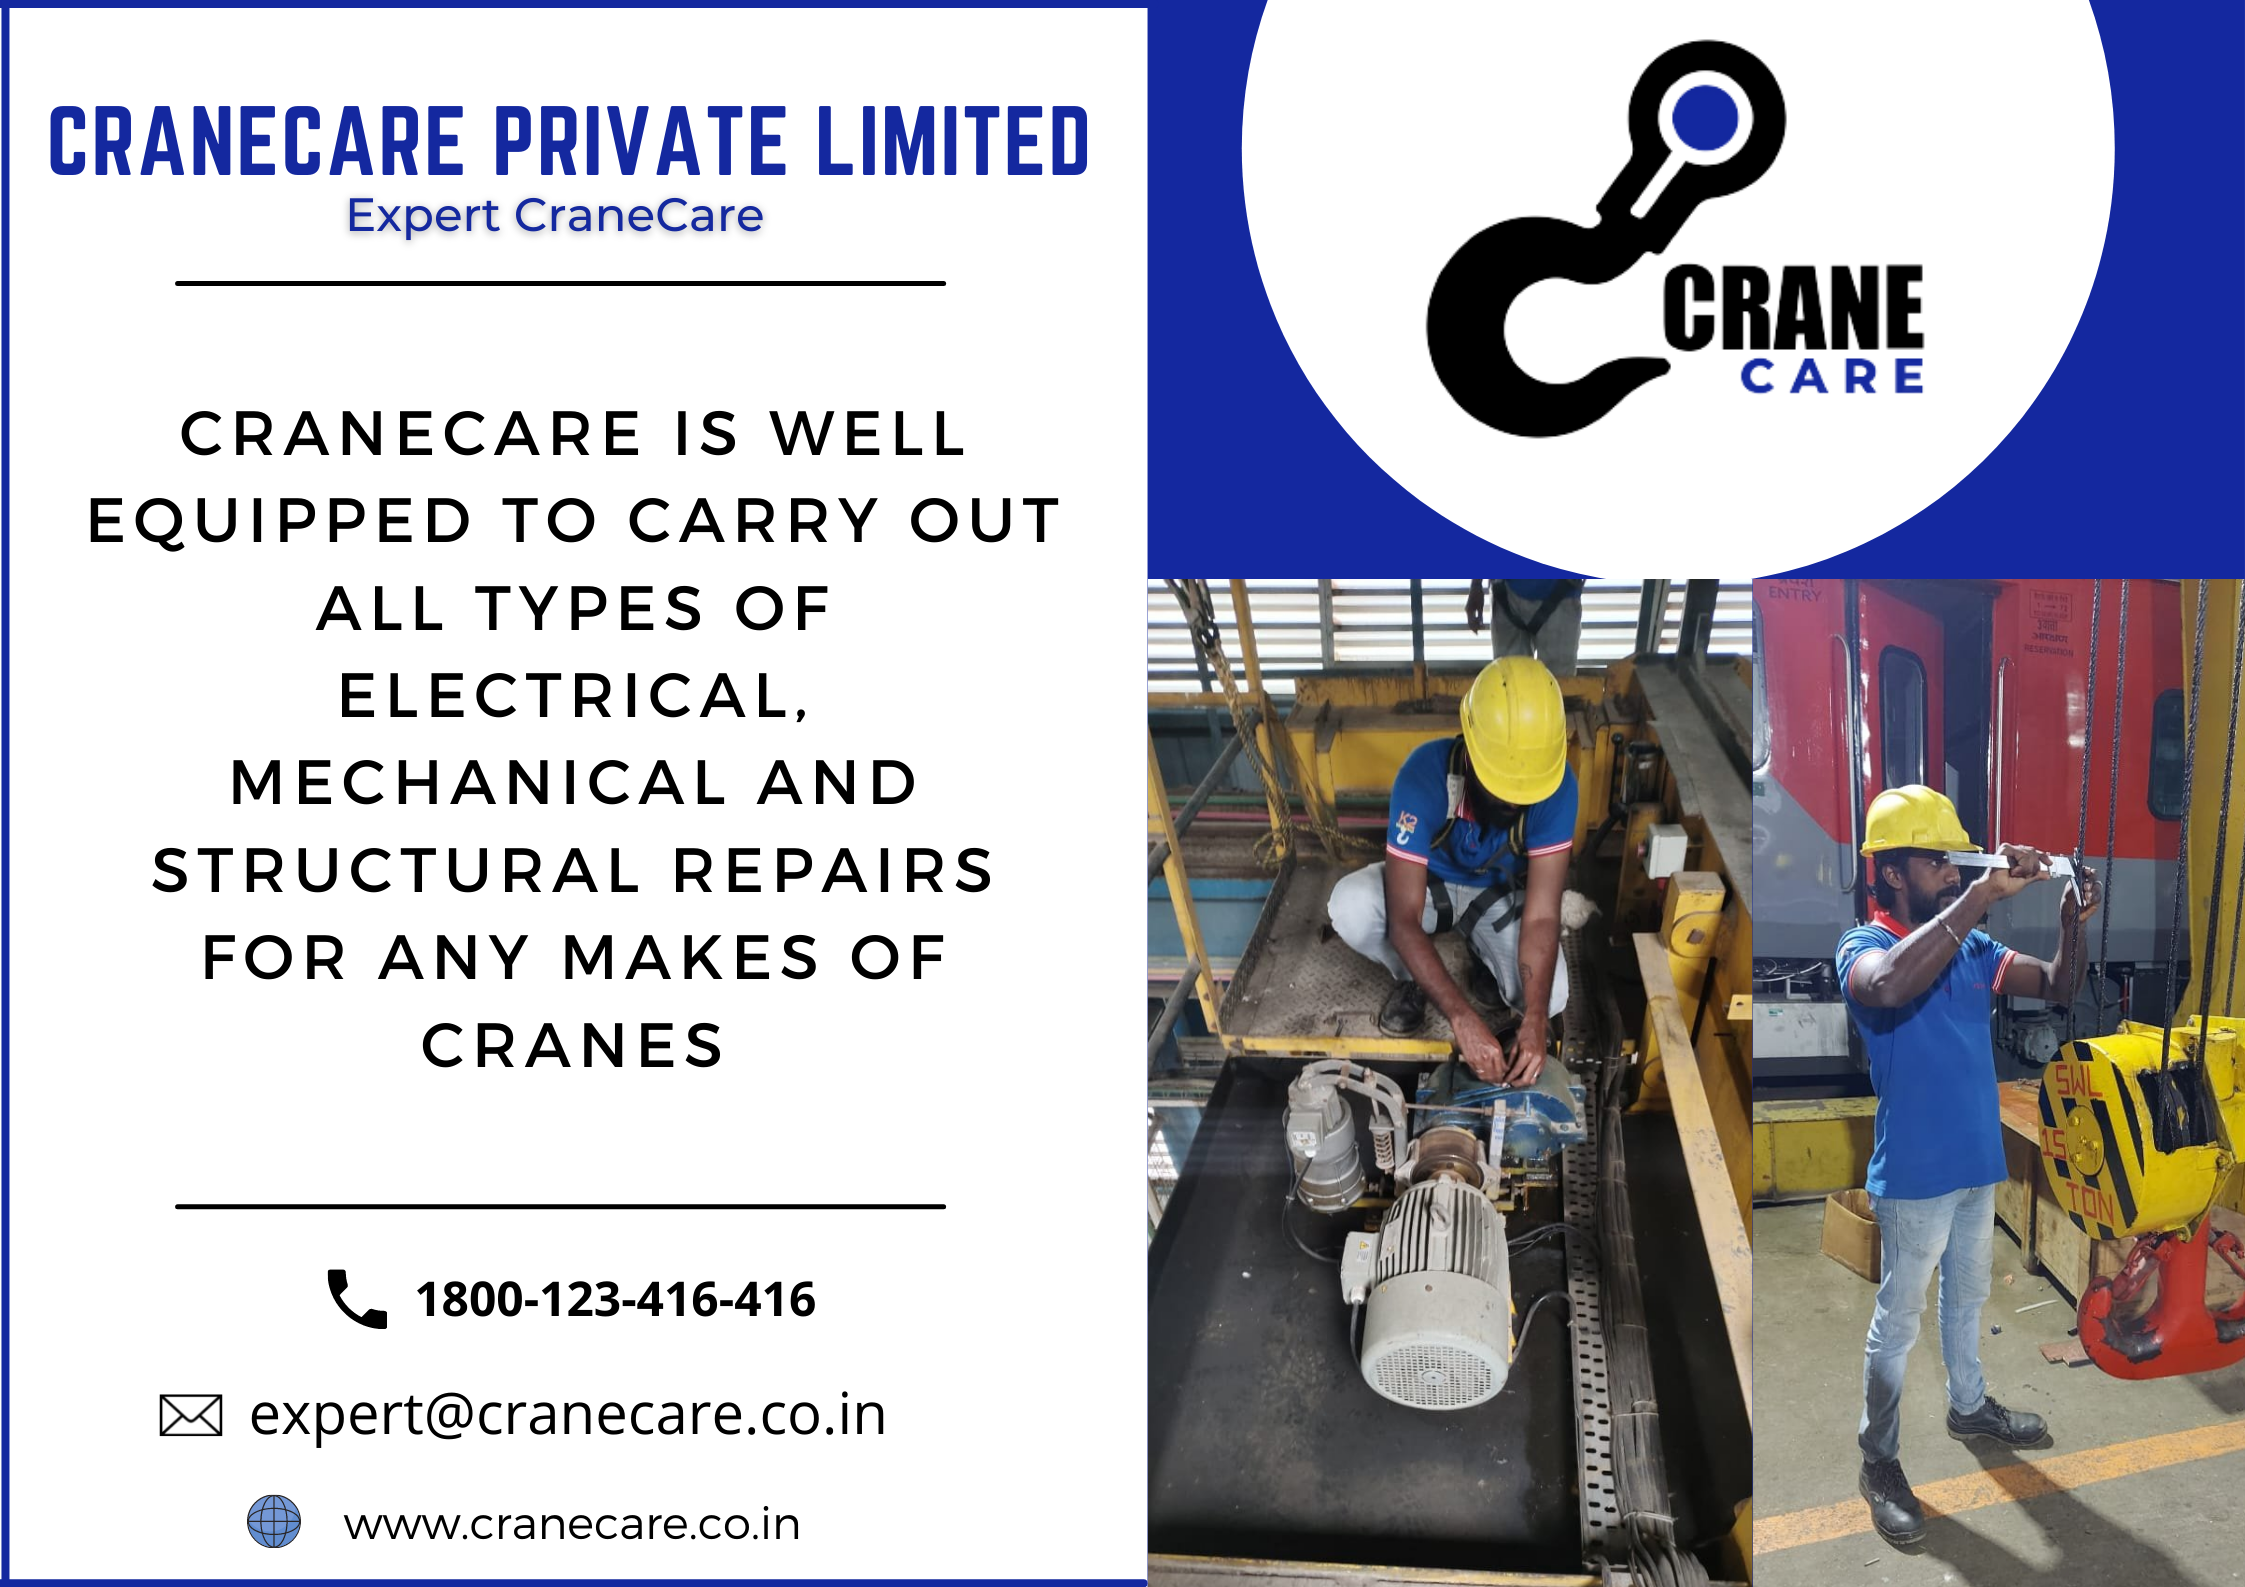 CraneCare is well equipped to carry out